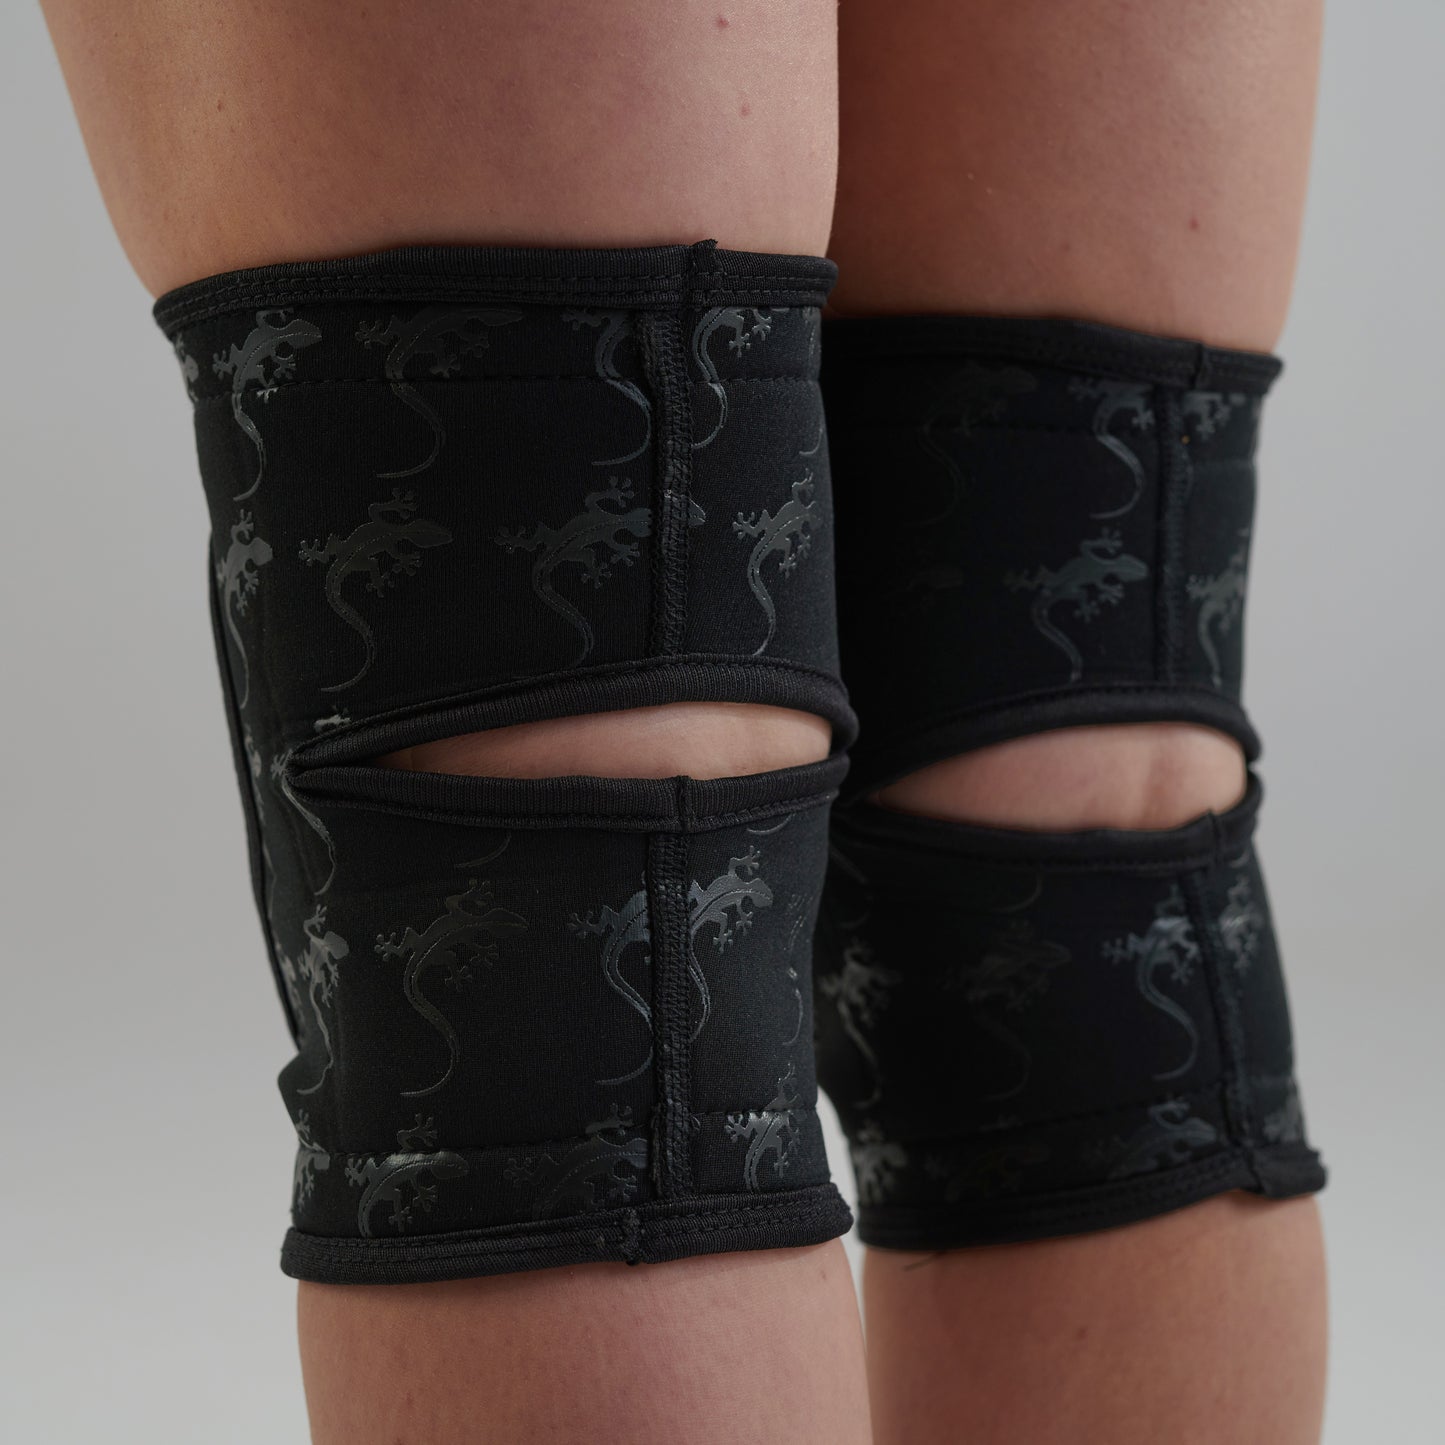 Superior Grip Gekko Knee Pads (2 pcs) - 40% off strictly while stocks last